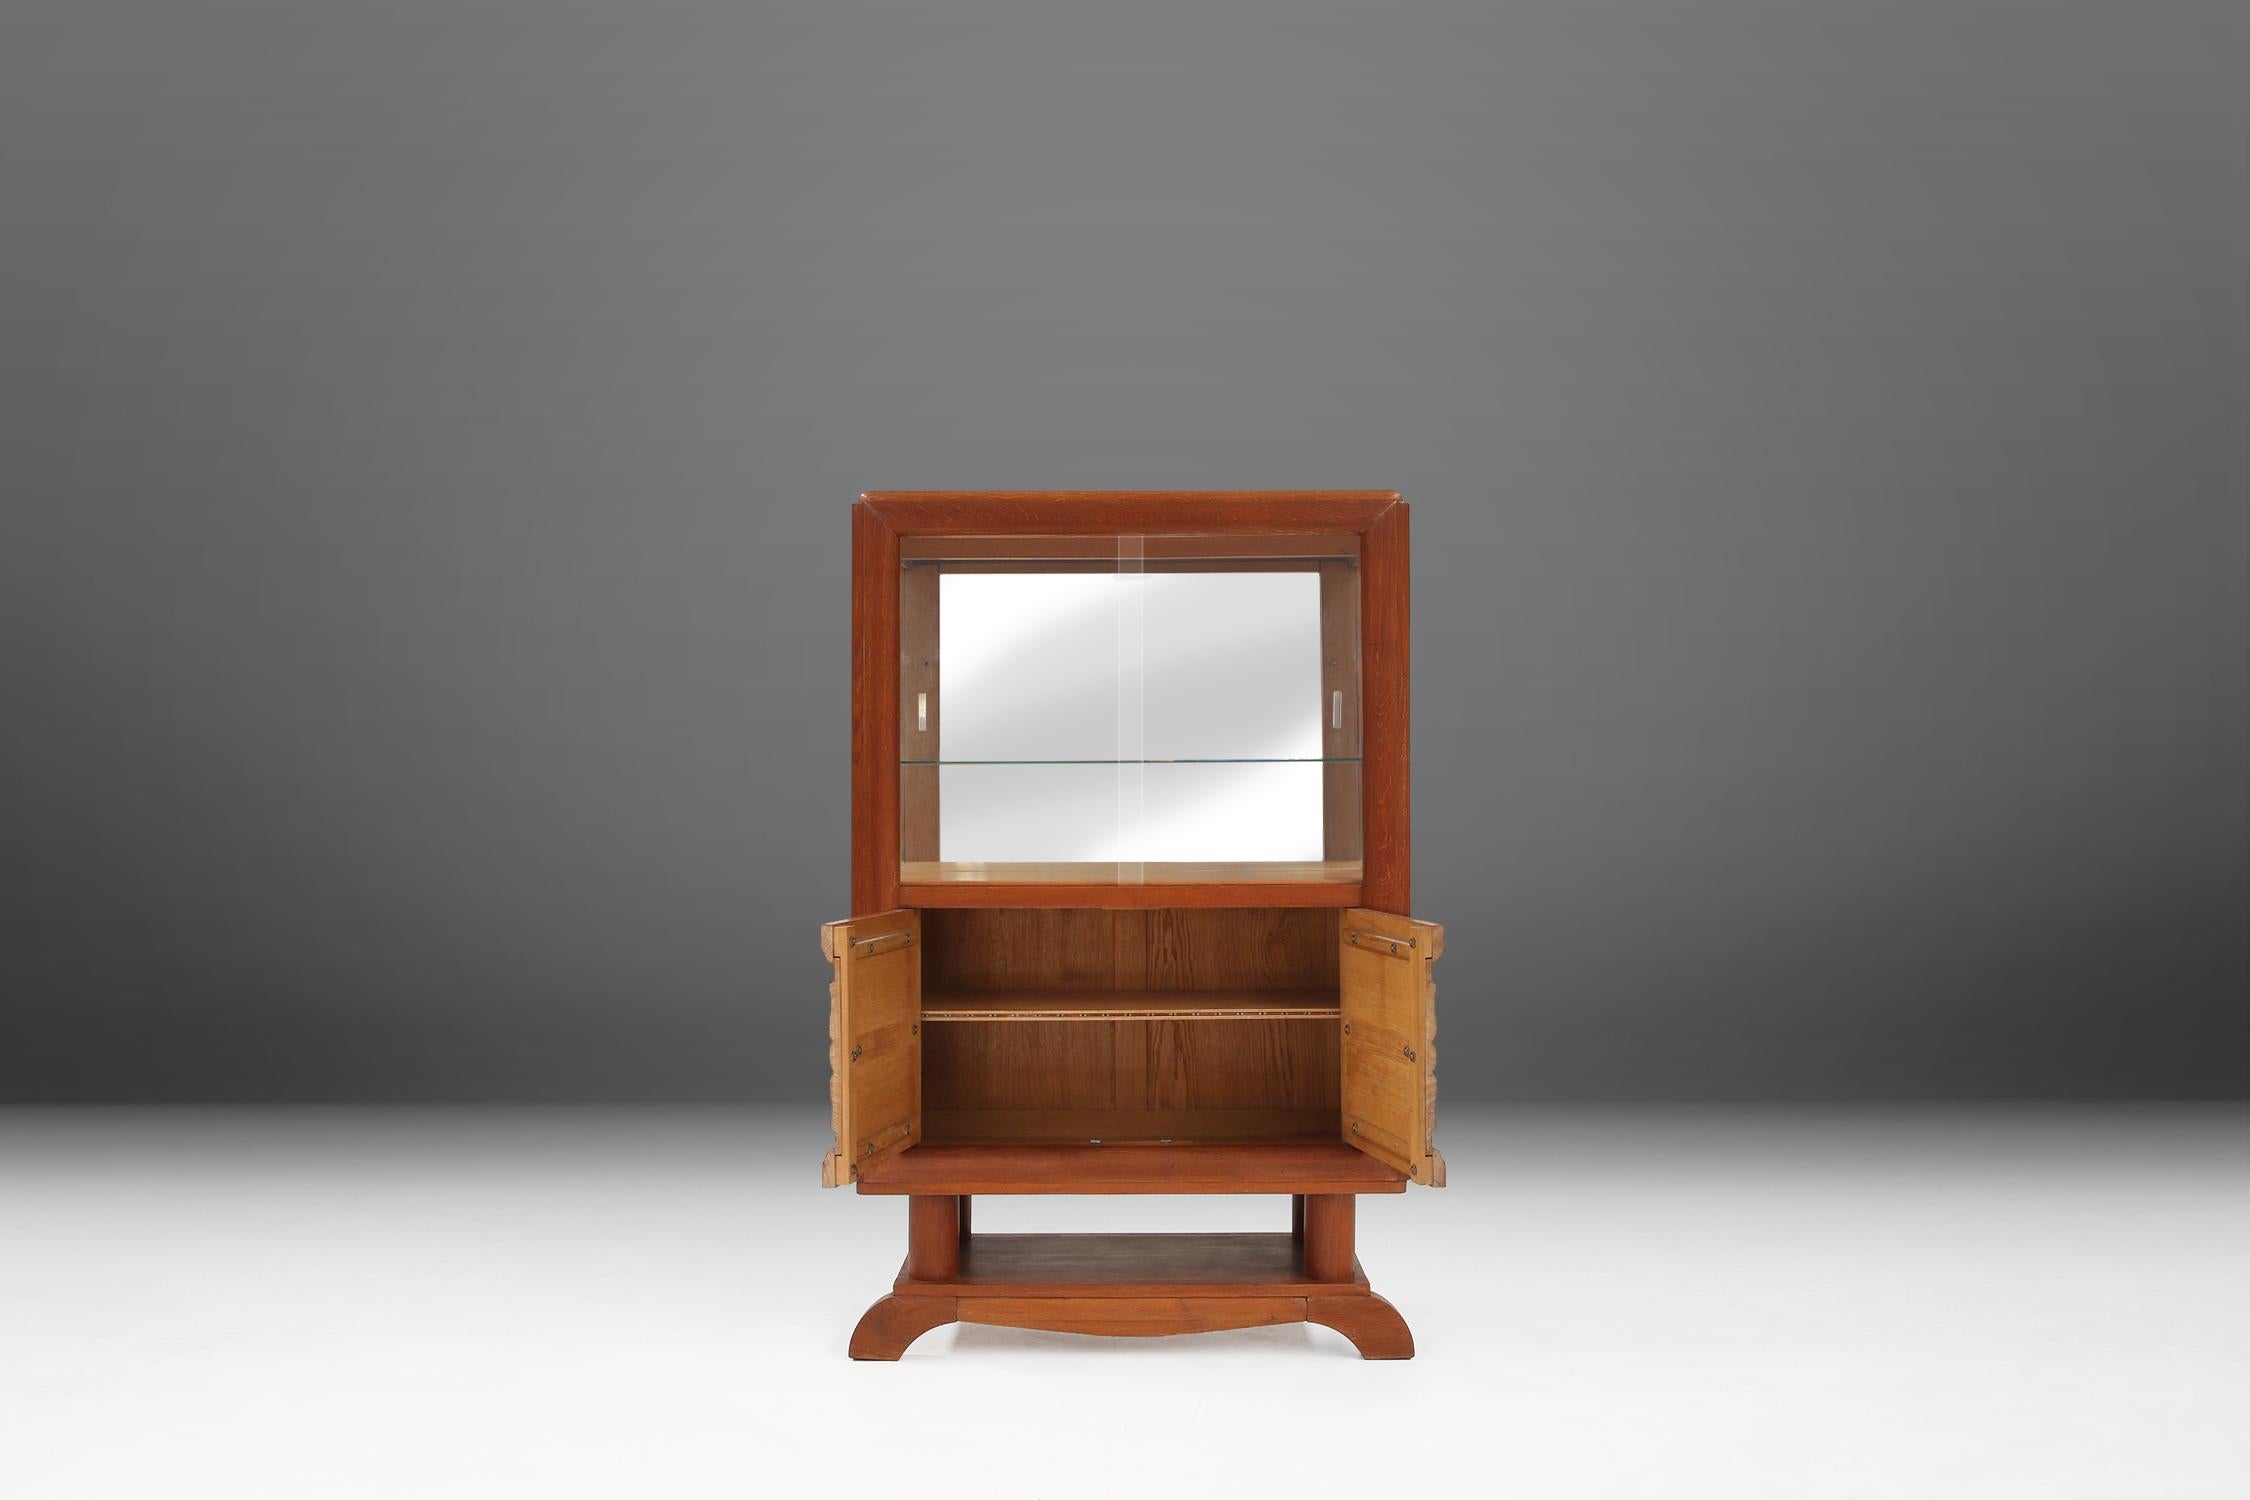 French Art Deco Vitrine Cabinet Attributed to Gaston Poisson, 1940s For Sale